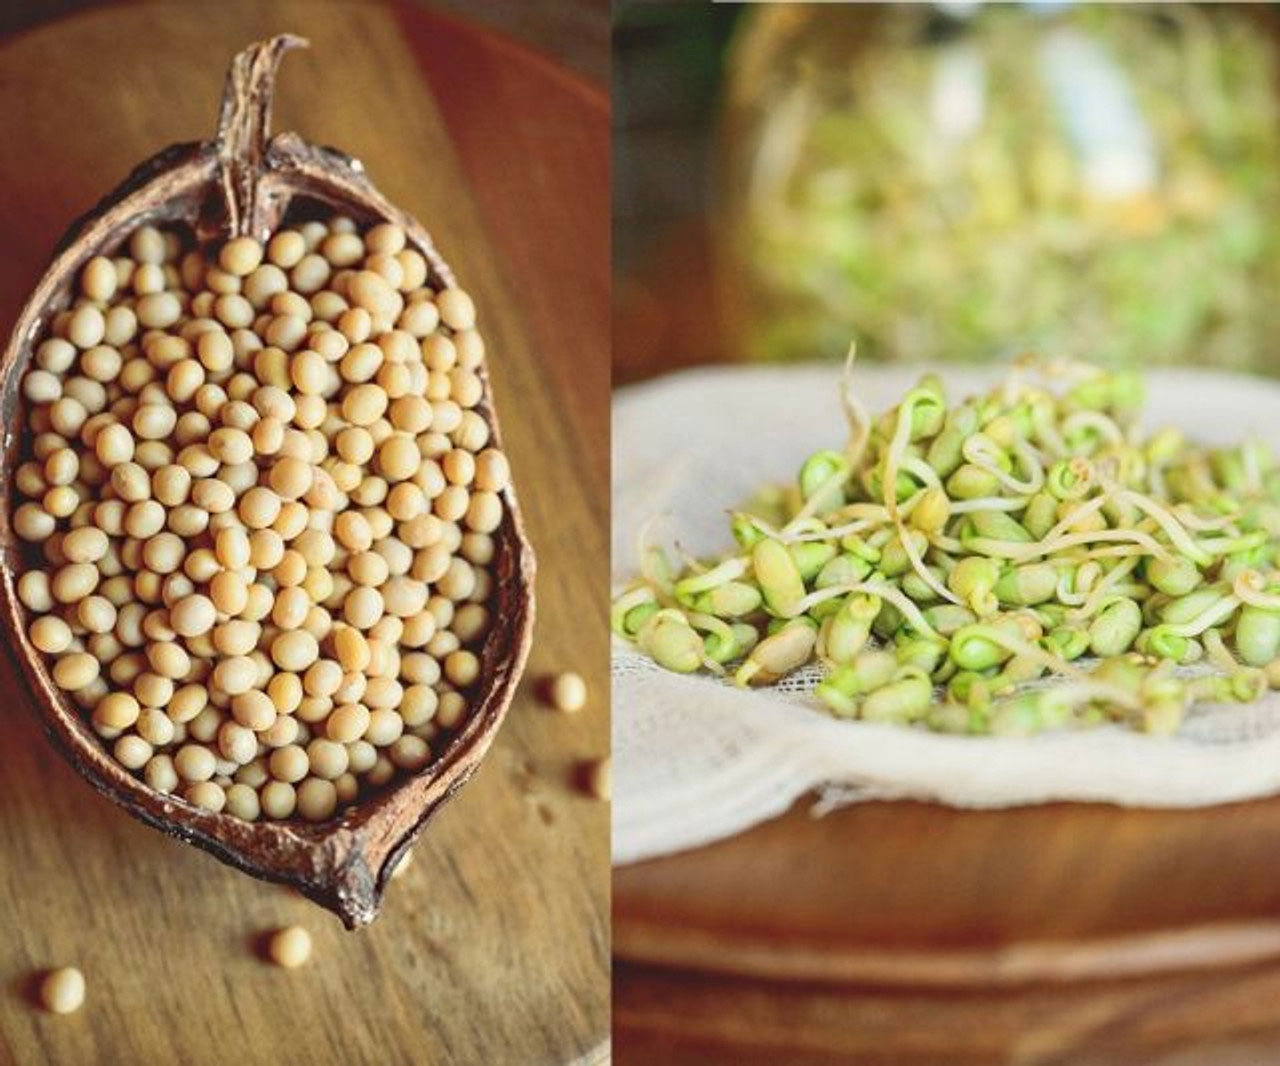 Two side-by-side images, one showing Natto Soybeans, the other showing soybean sprouts on a cheesecloth.